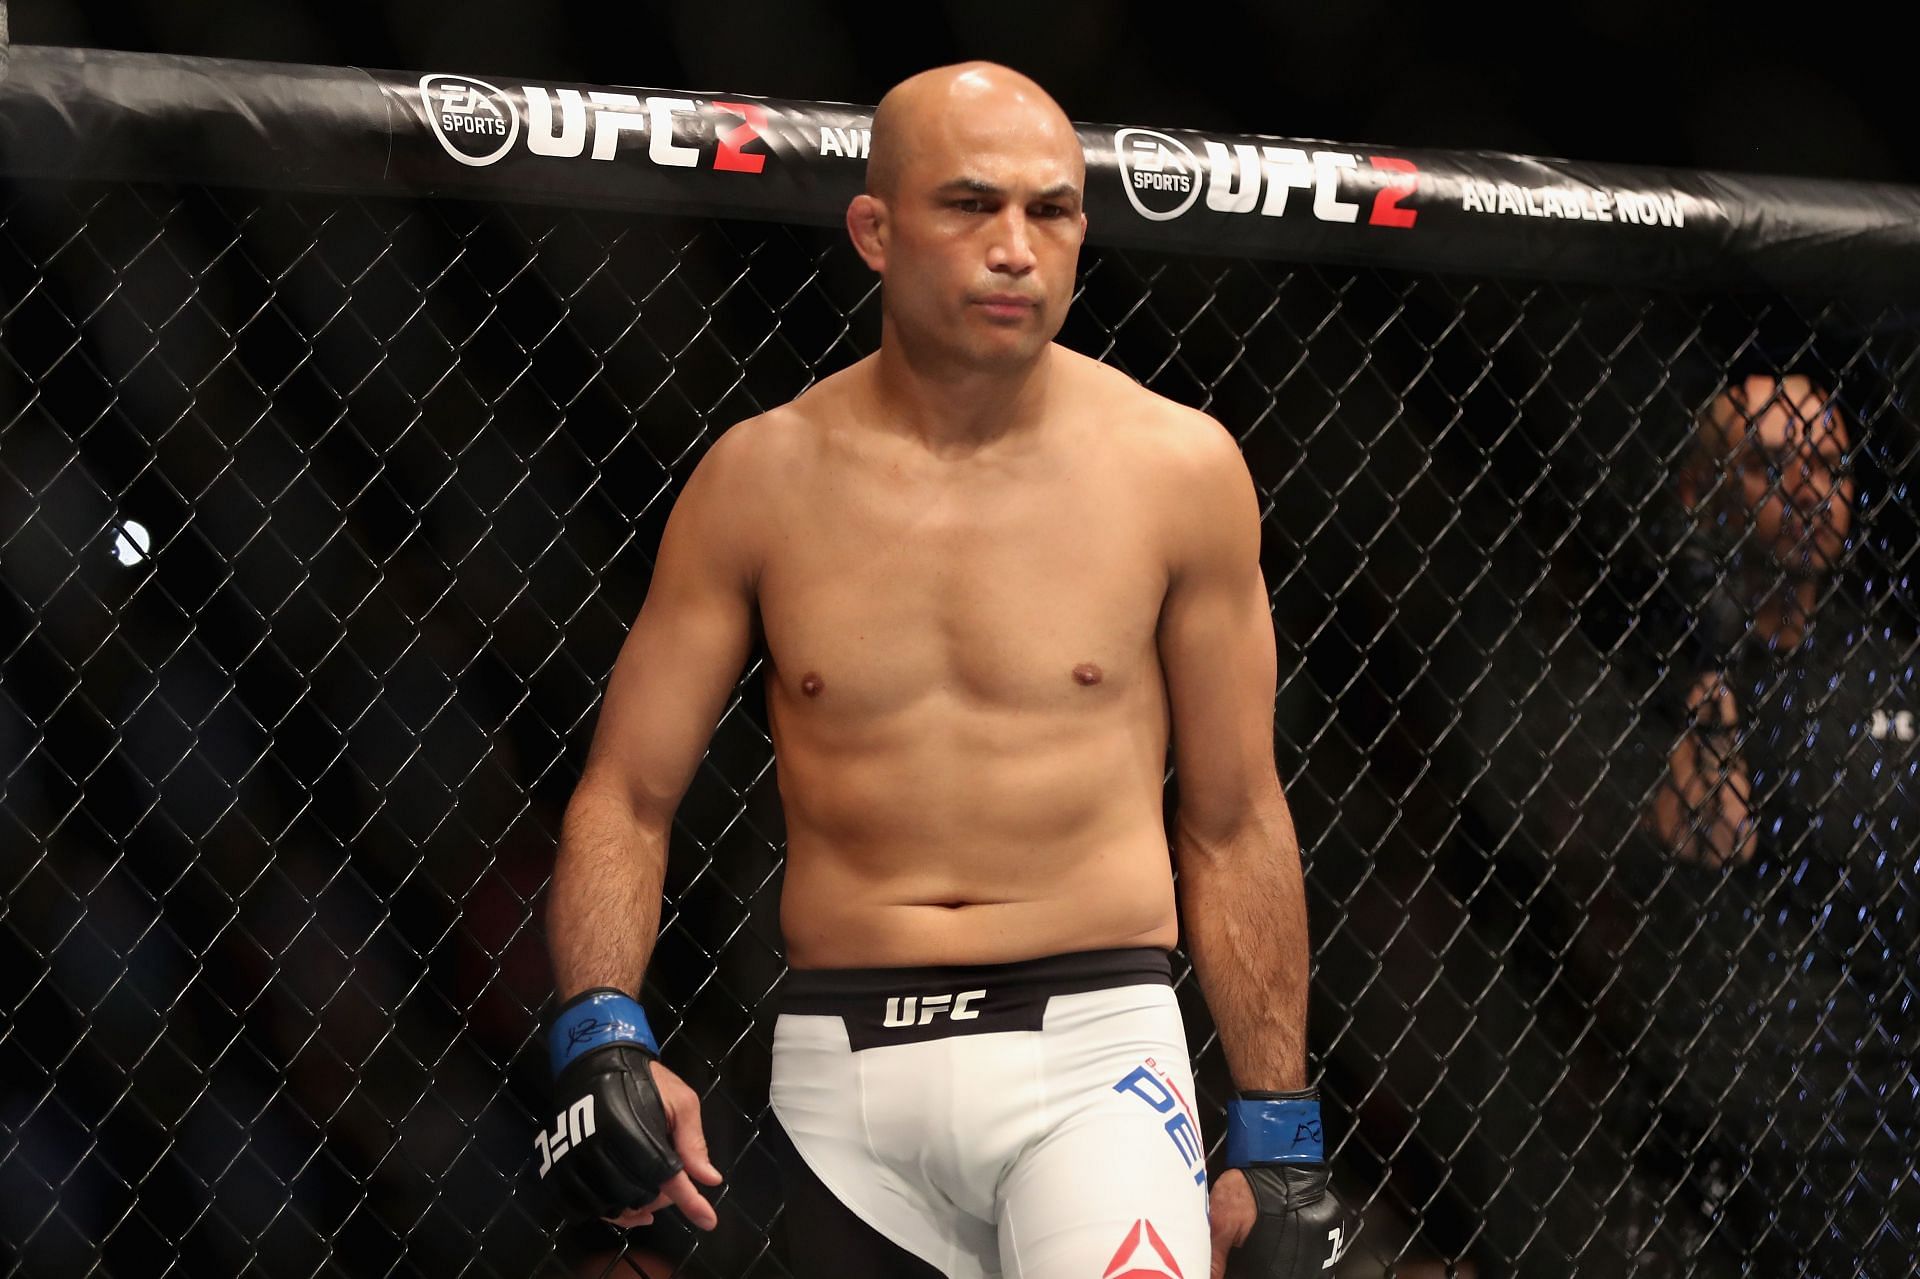 BJ Penn needed less than a year to cut a path to the top of the UFC lightweight division